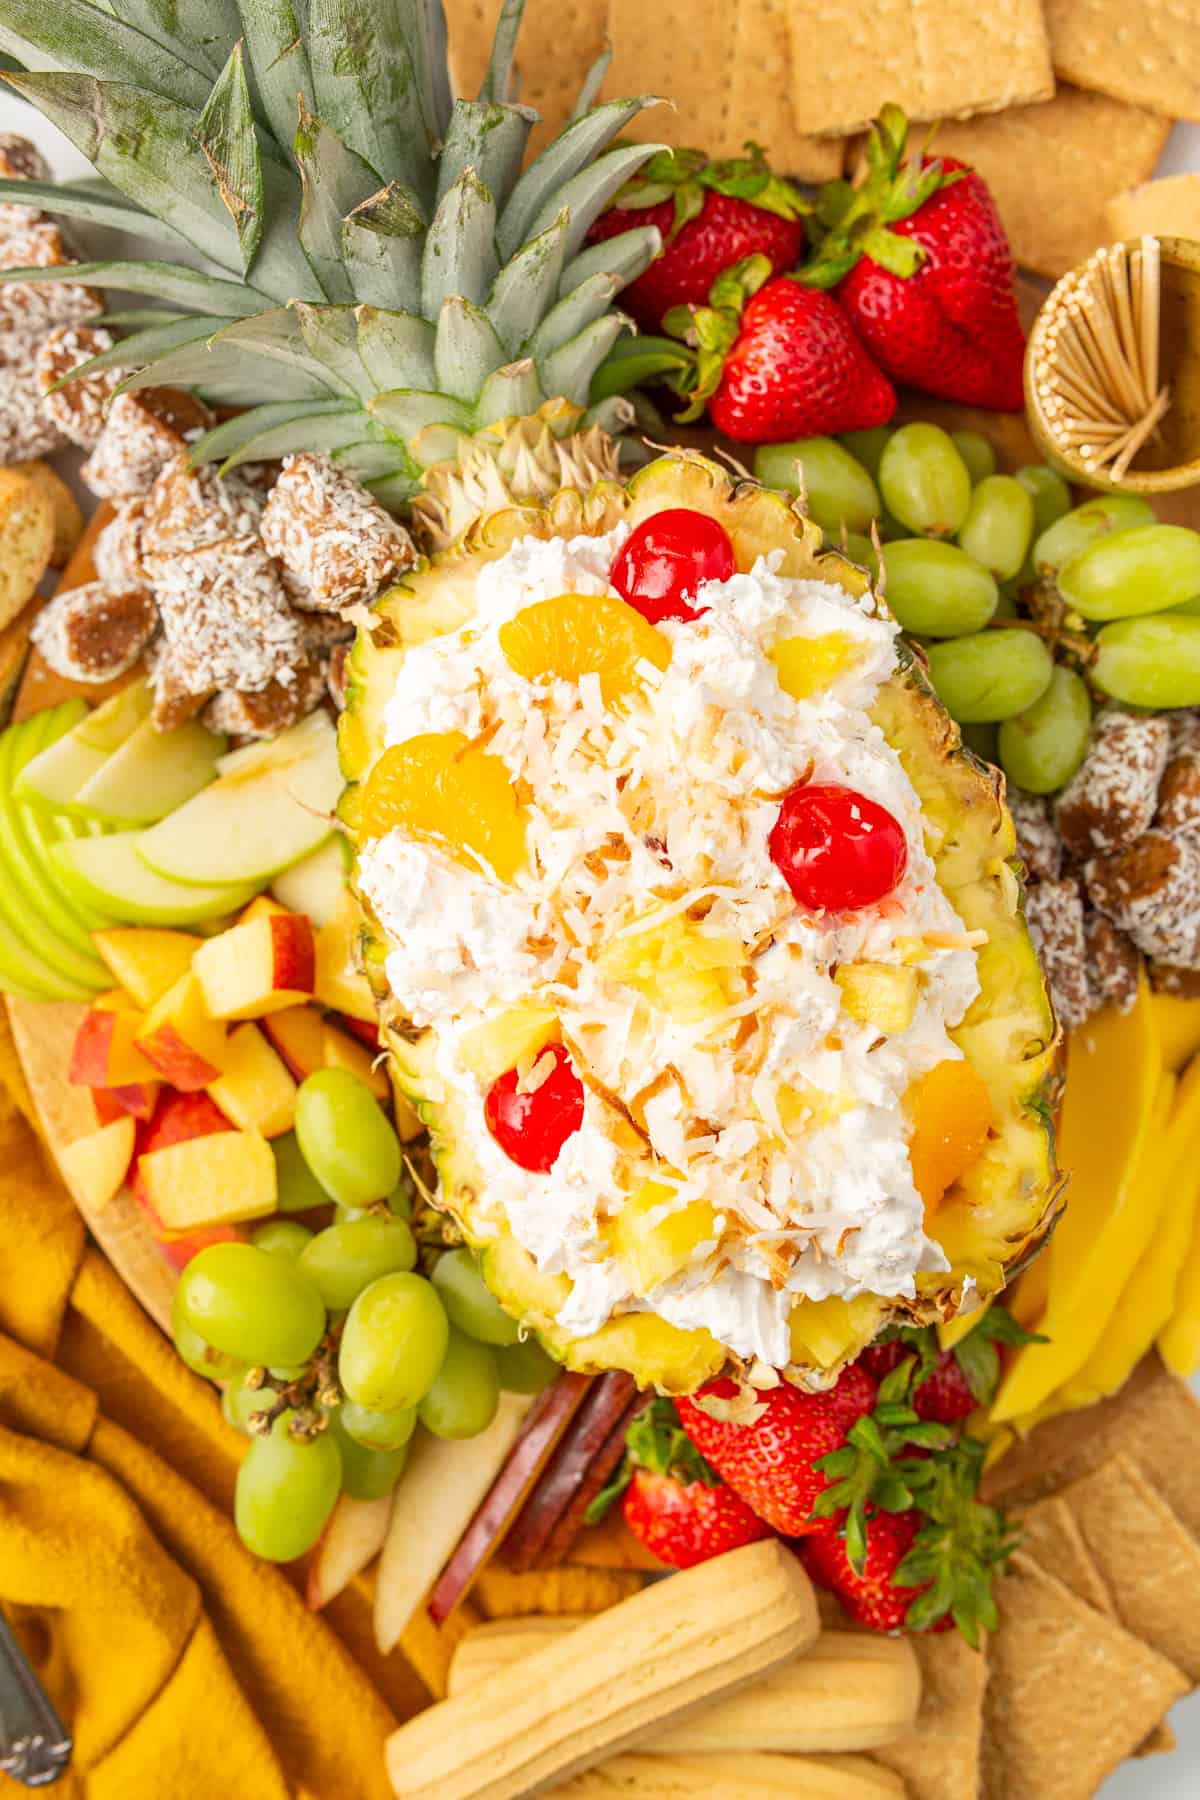 Easy fruit dip made with cool whip and pina colada flavors showcased in a halved pineapple surrounded by fresh fruit.